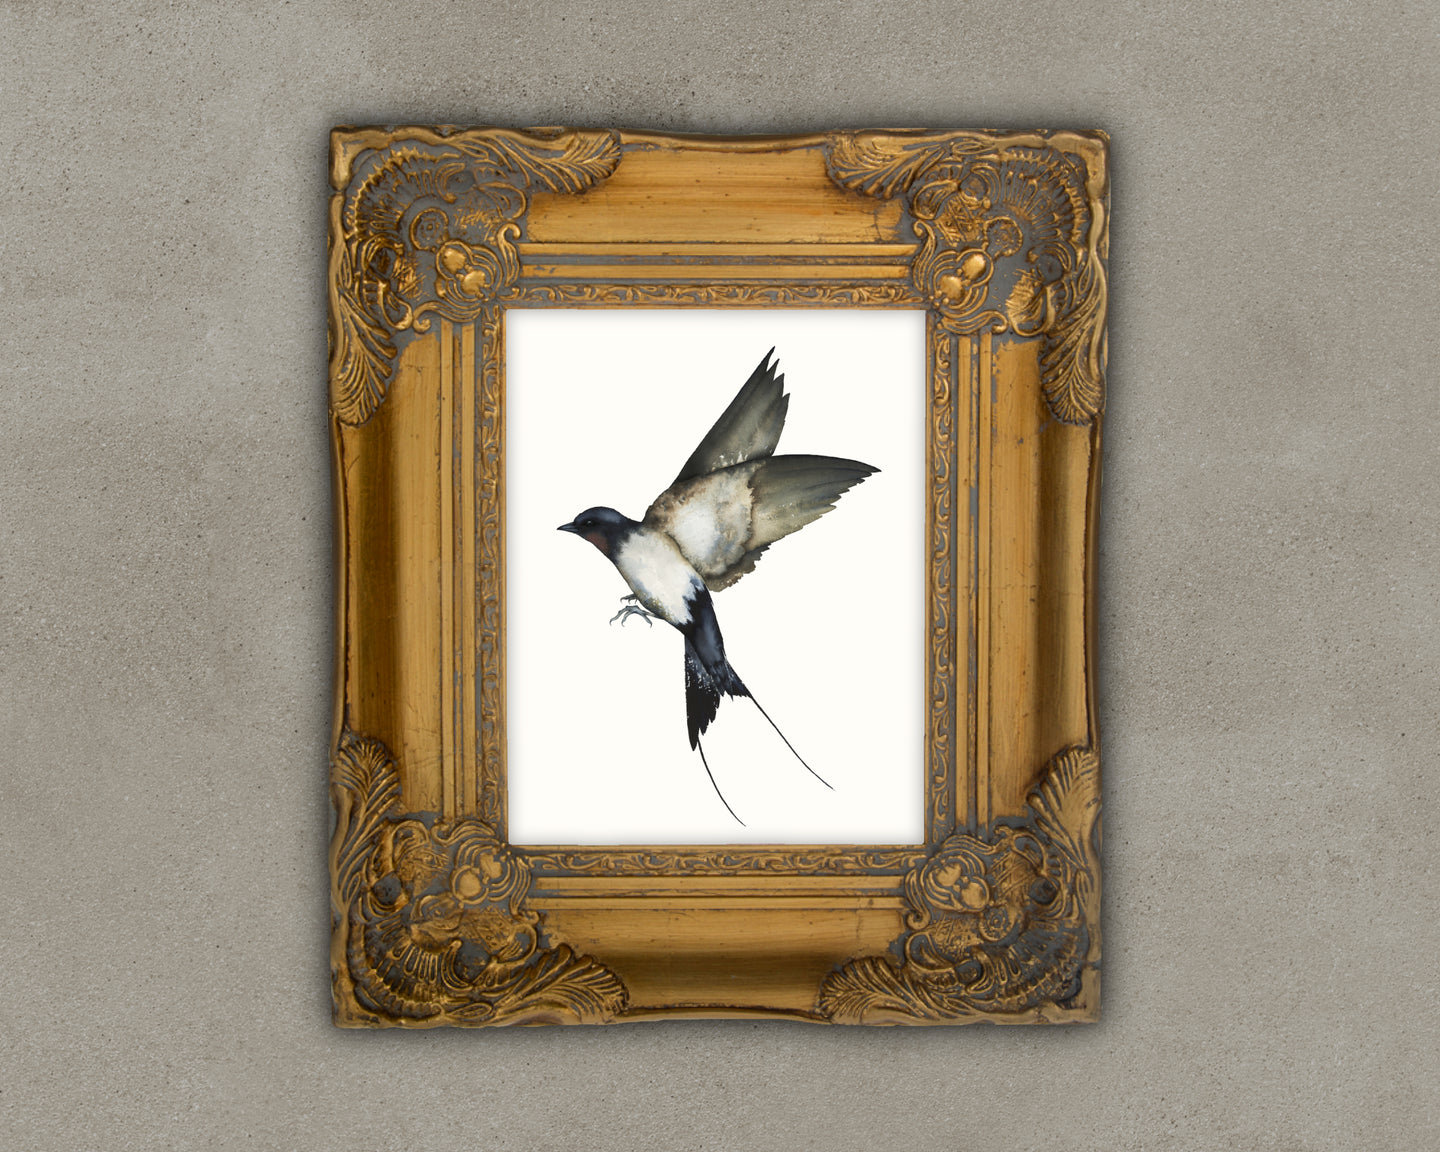 “A Soft Place To Land” Fine Art Print - Swallow (2021)